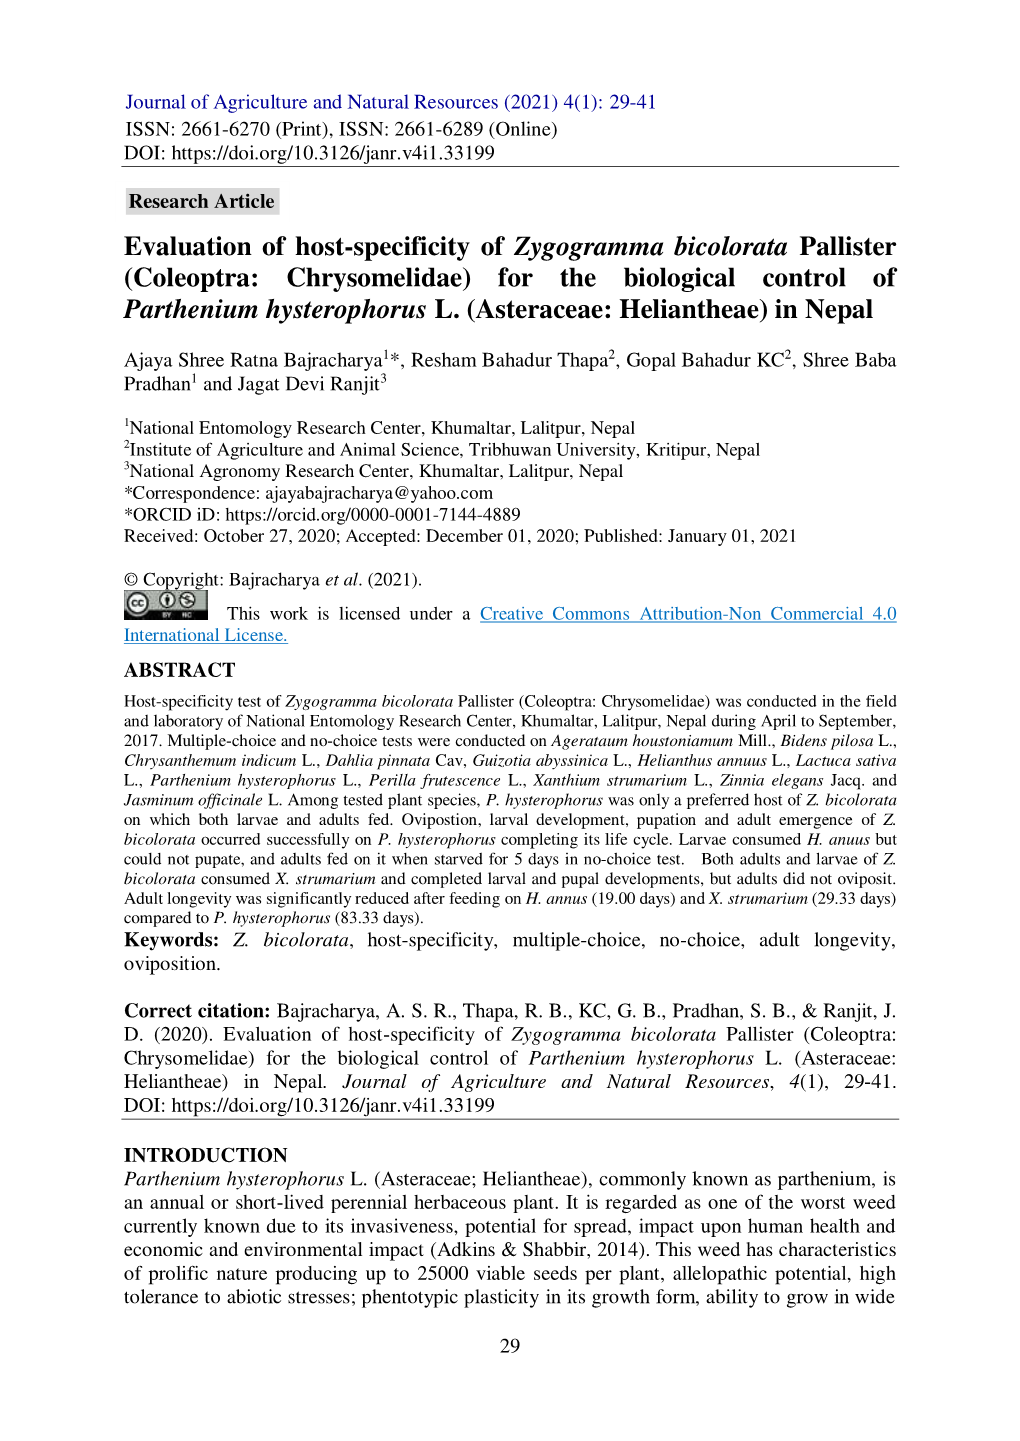 Evaluation of Host-Specificity of Zygogramma Bicolorata Pallister (Coleoptra: Chrysomelidae) for the Biological Control of Parthenium Hysterophorus L